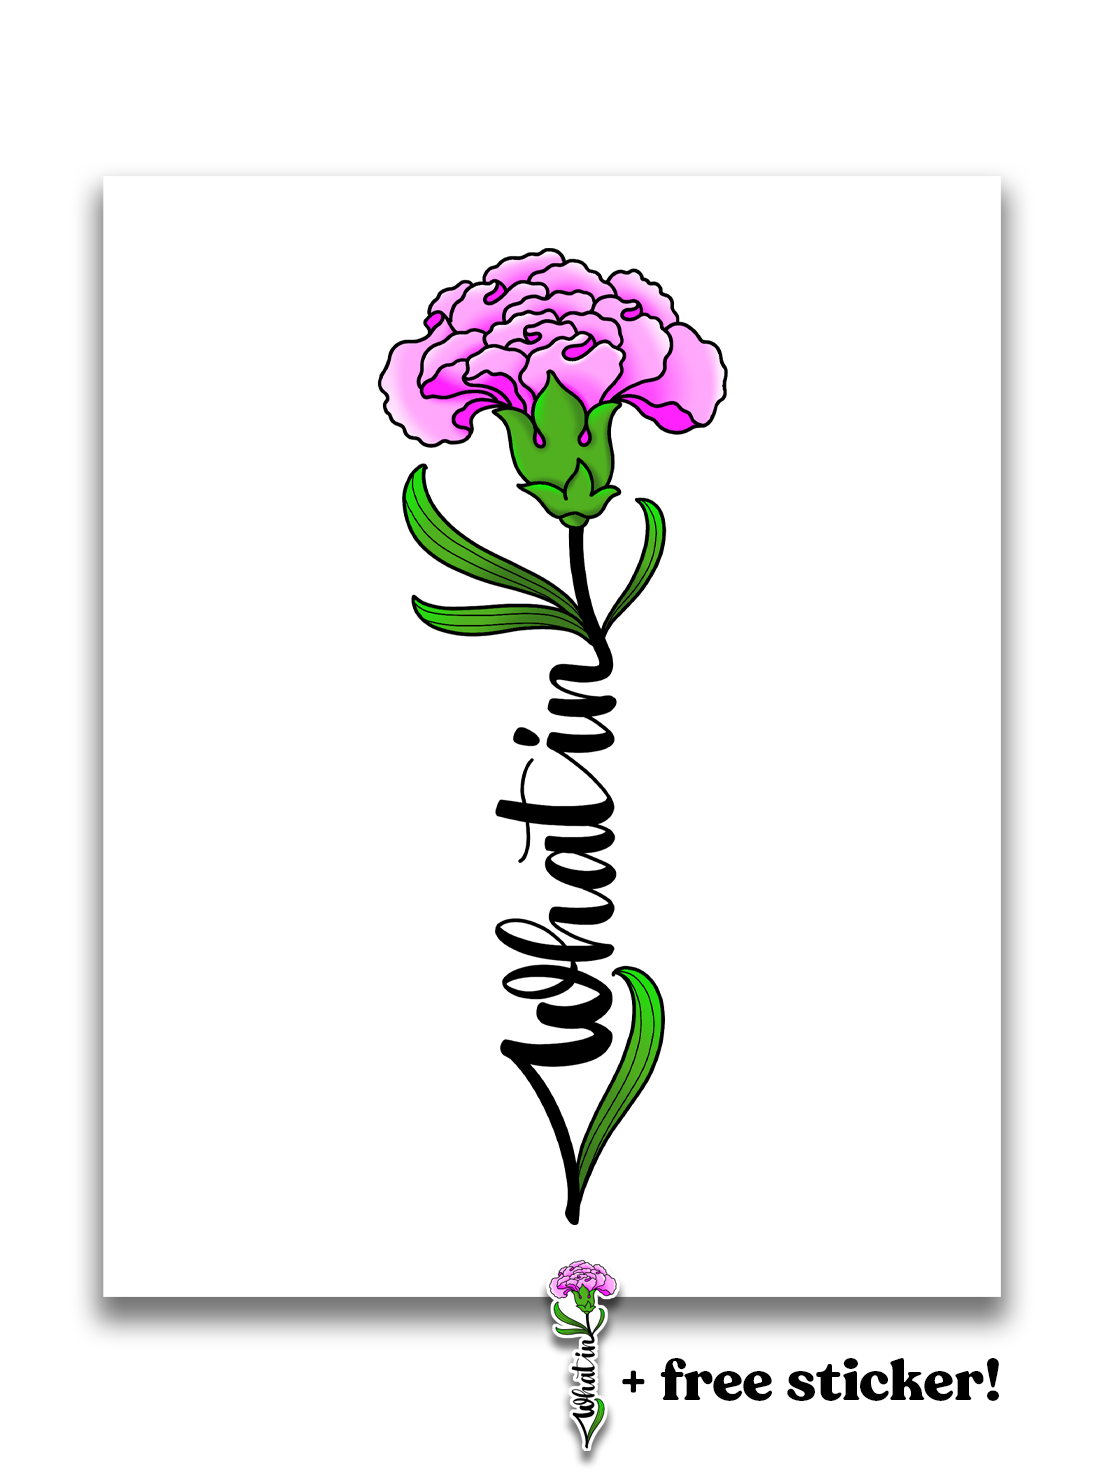 Aster Flower Tattoo - What Does it Mean? (Illustrated)